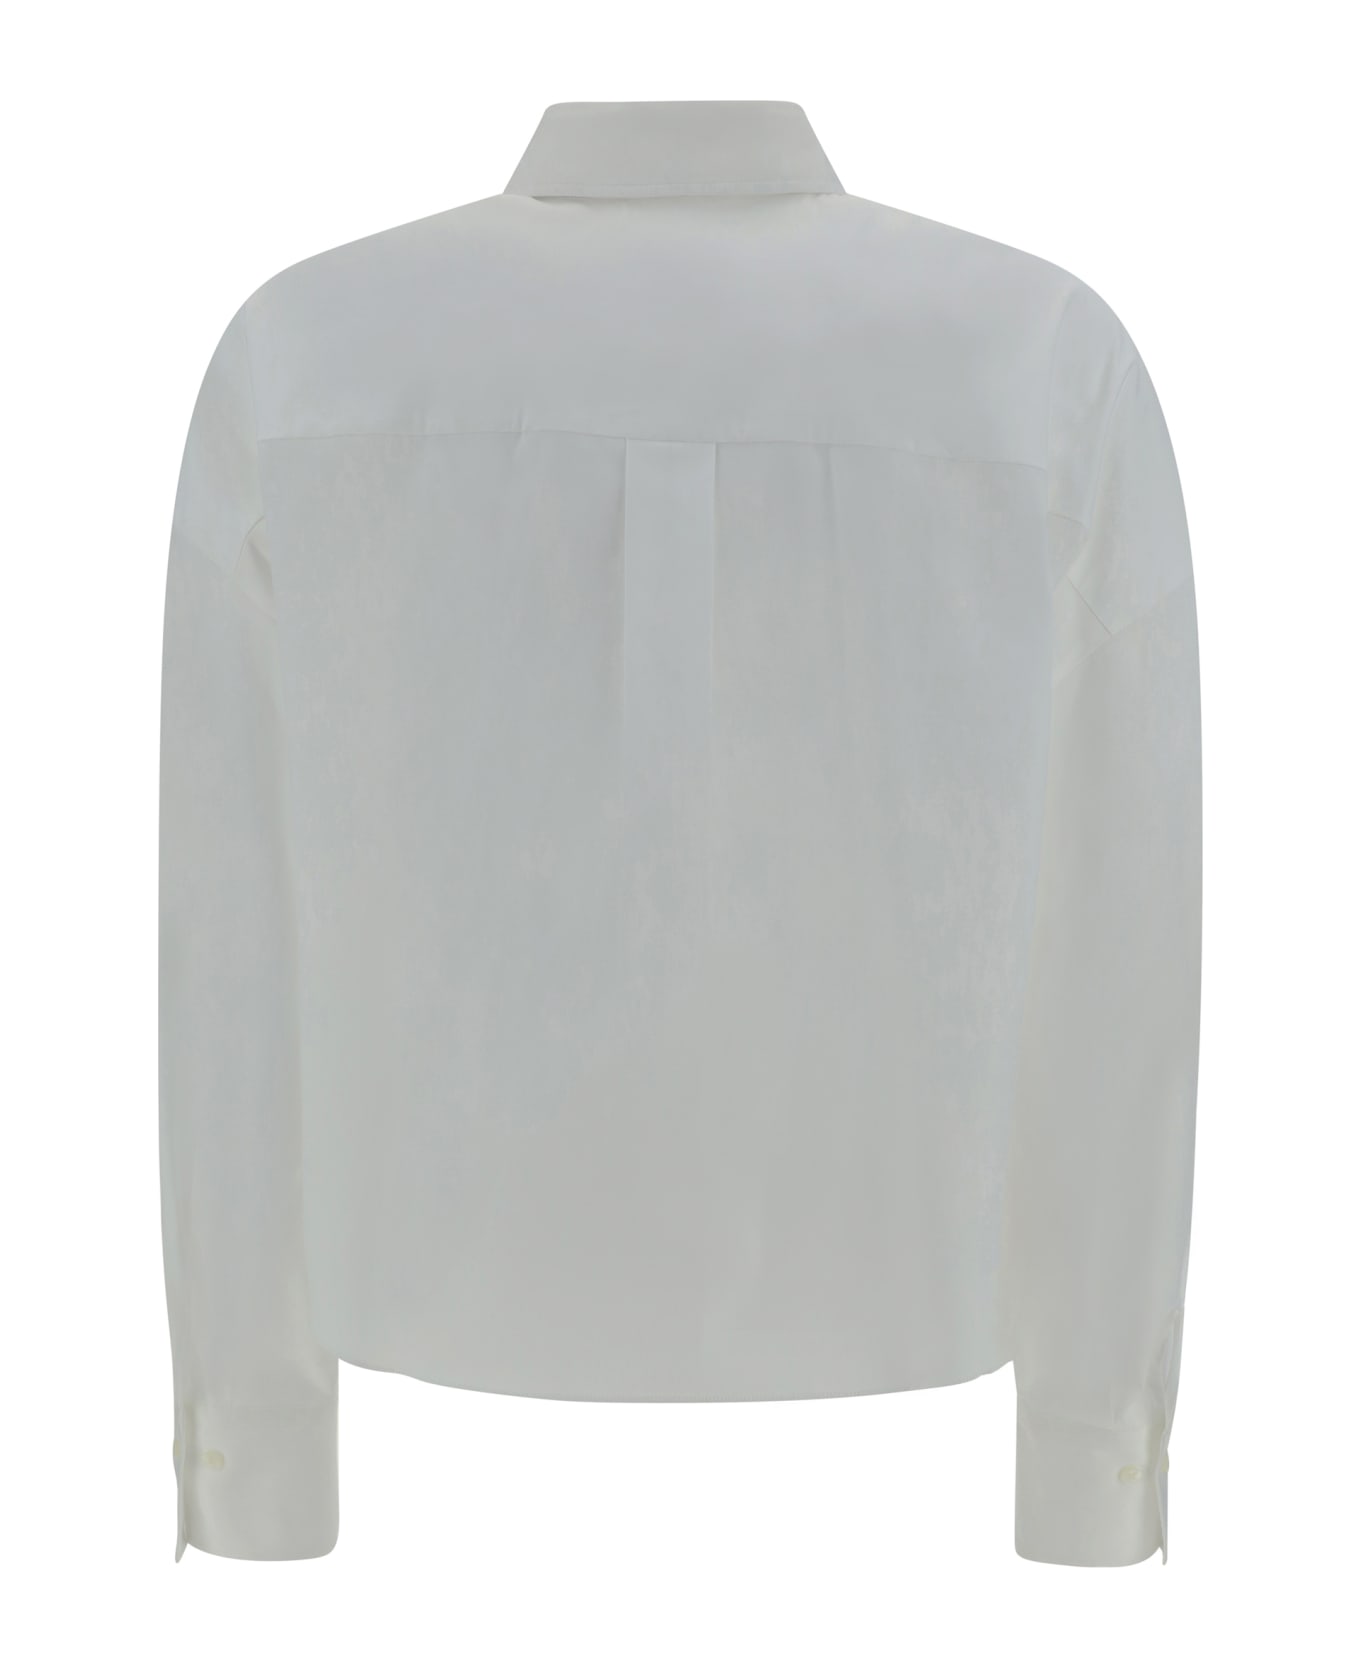 Brunello Cucinelli Long-sleeved Button-up Shirt - Bianco シャツ